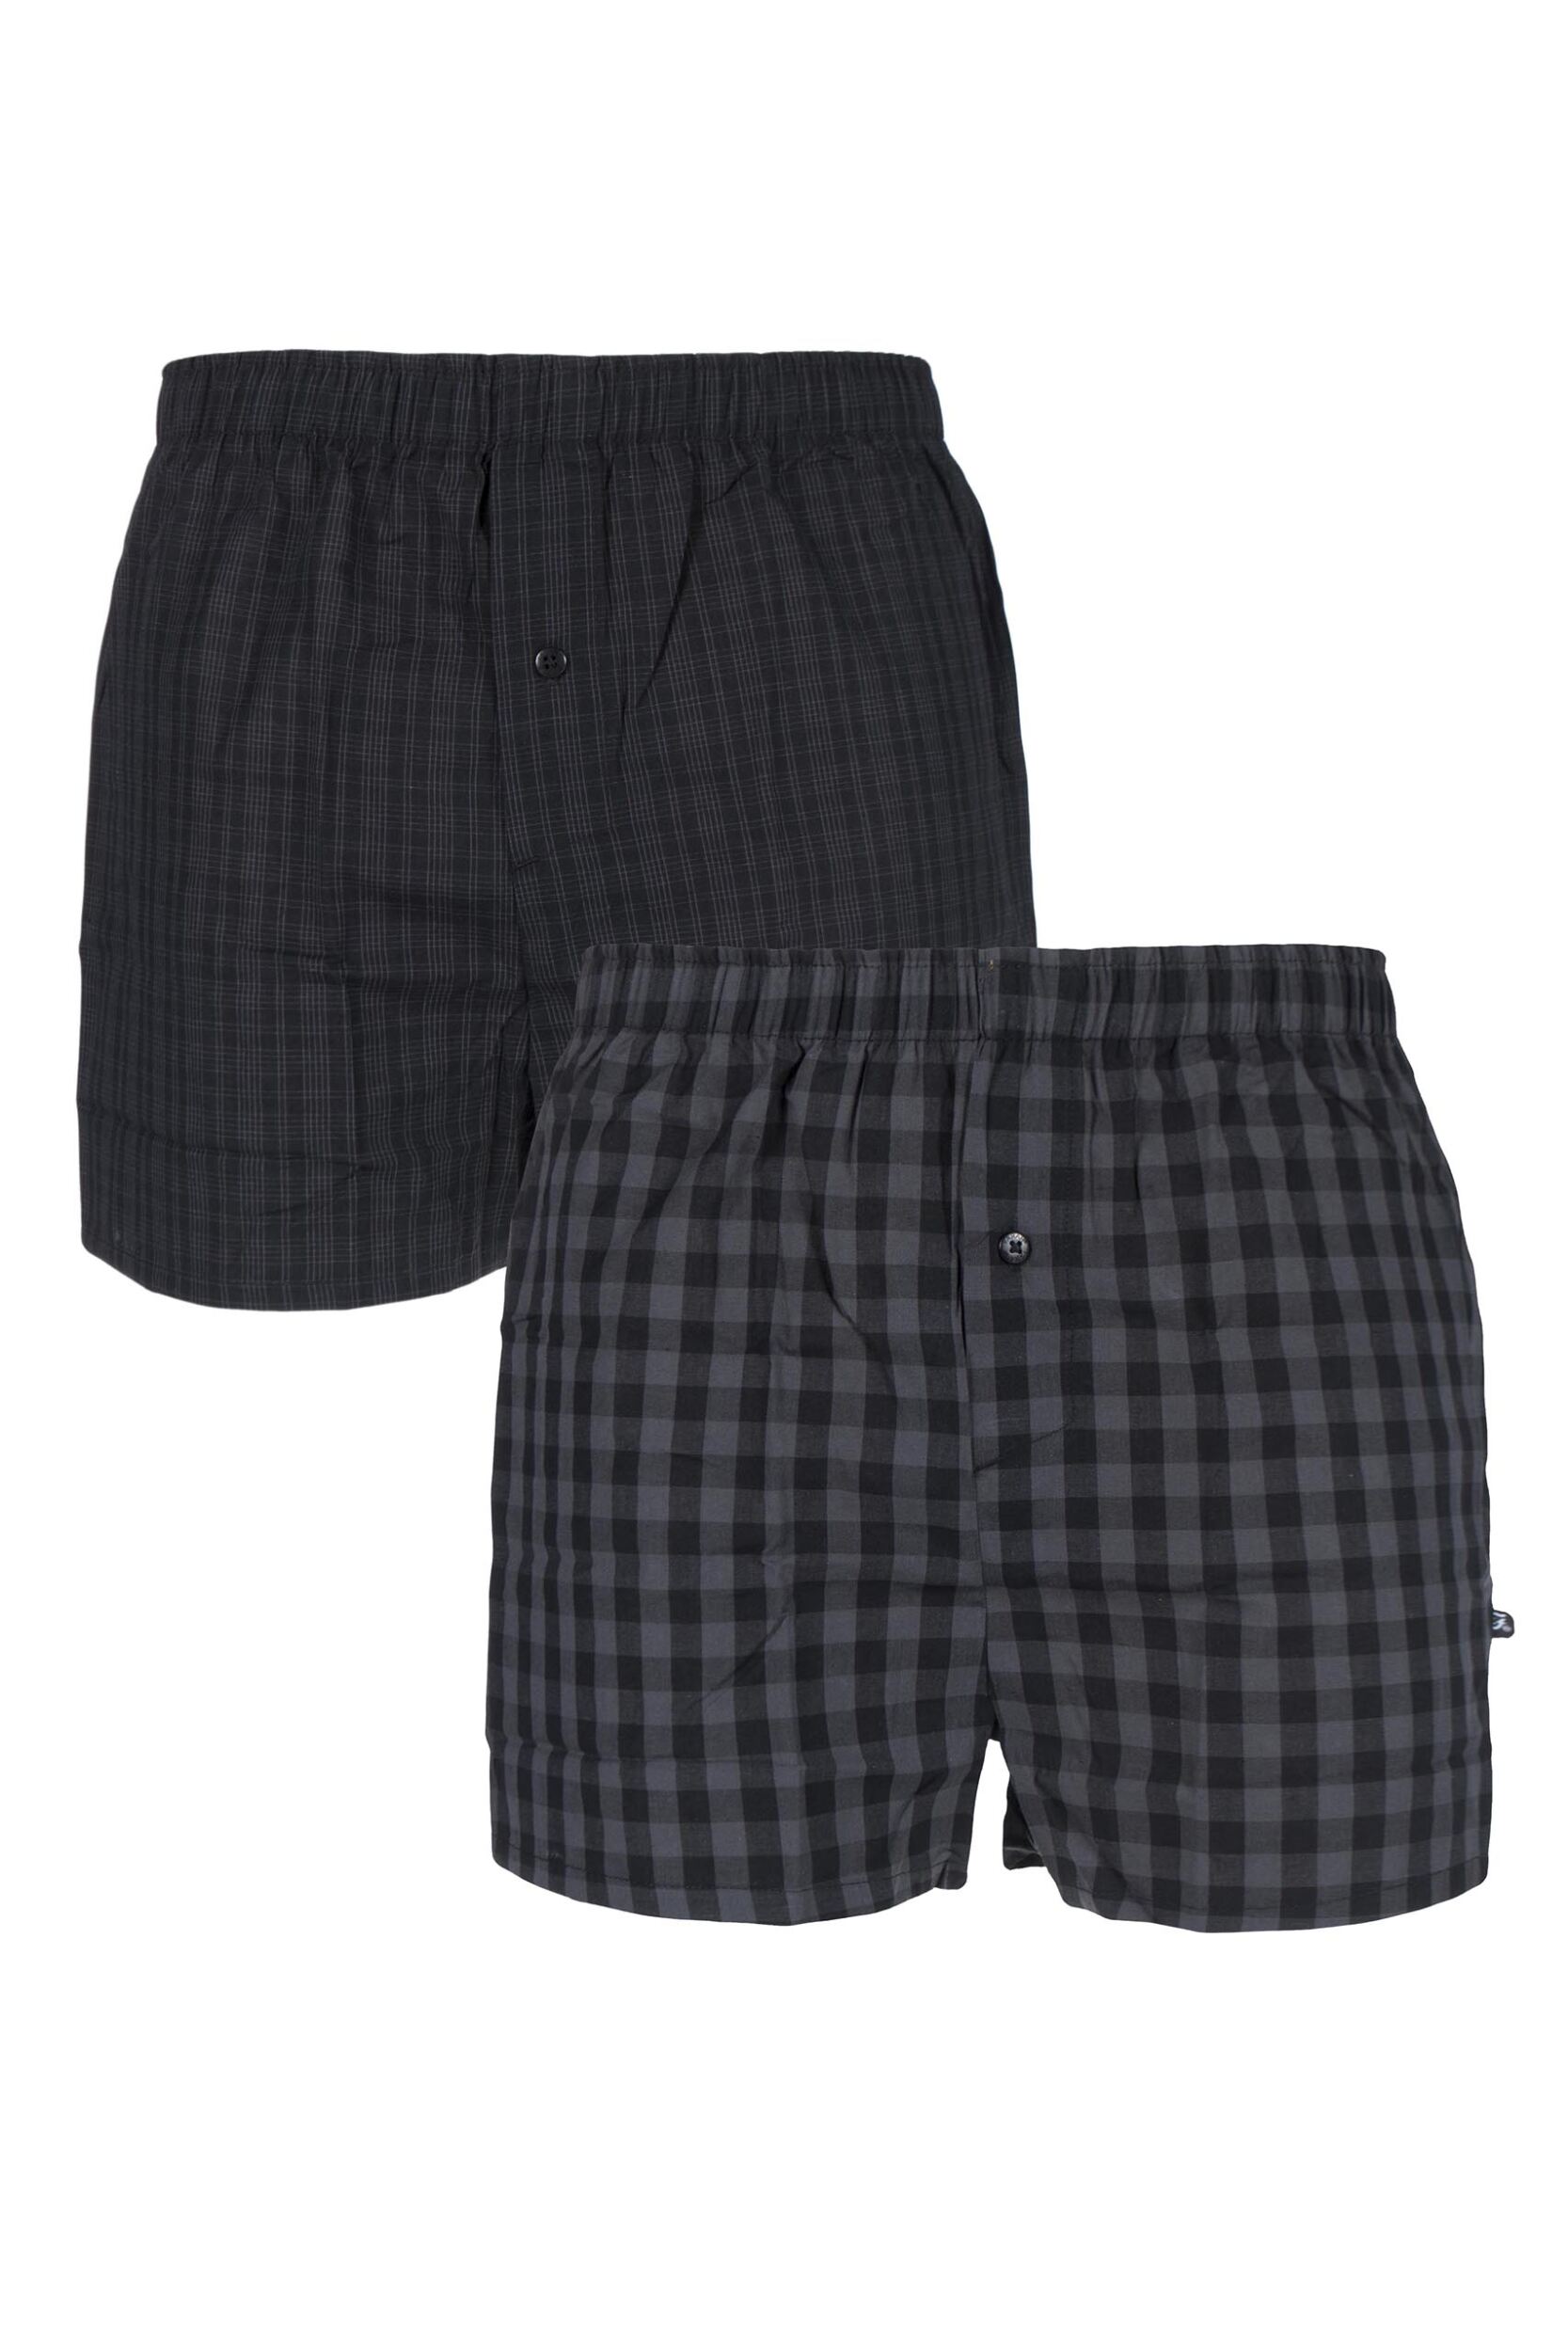 Mens 2 Pack Farah 100% Cotton Checked Woven Boxers | eBay